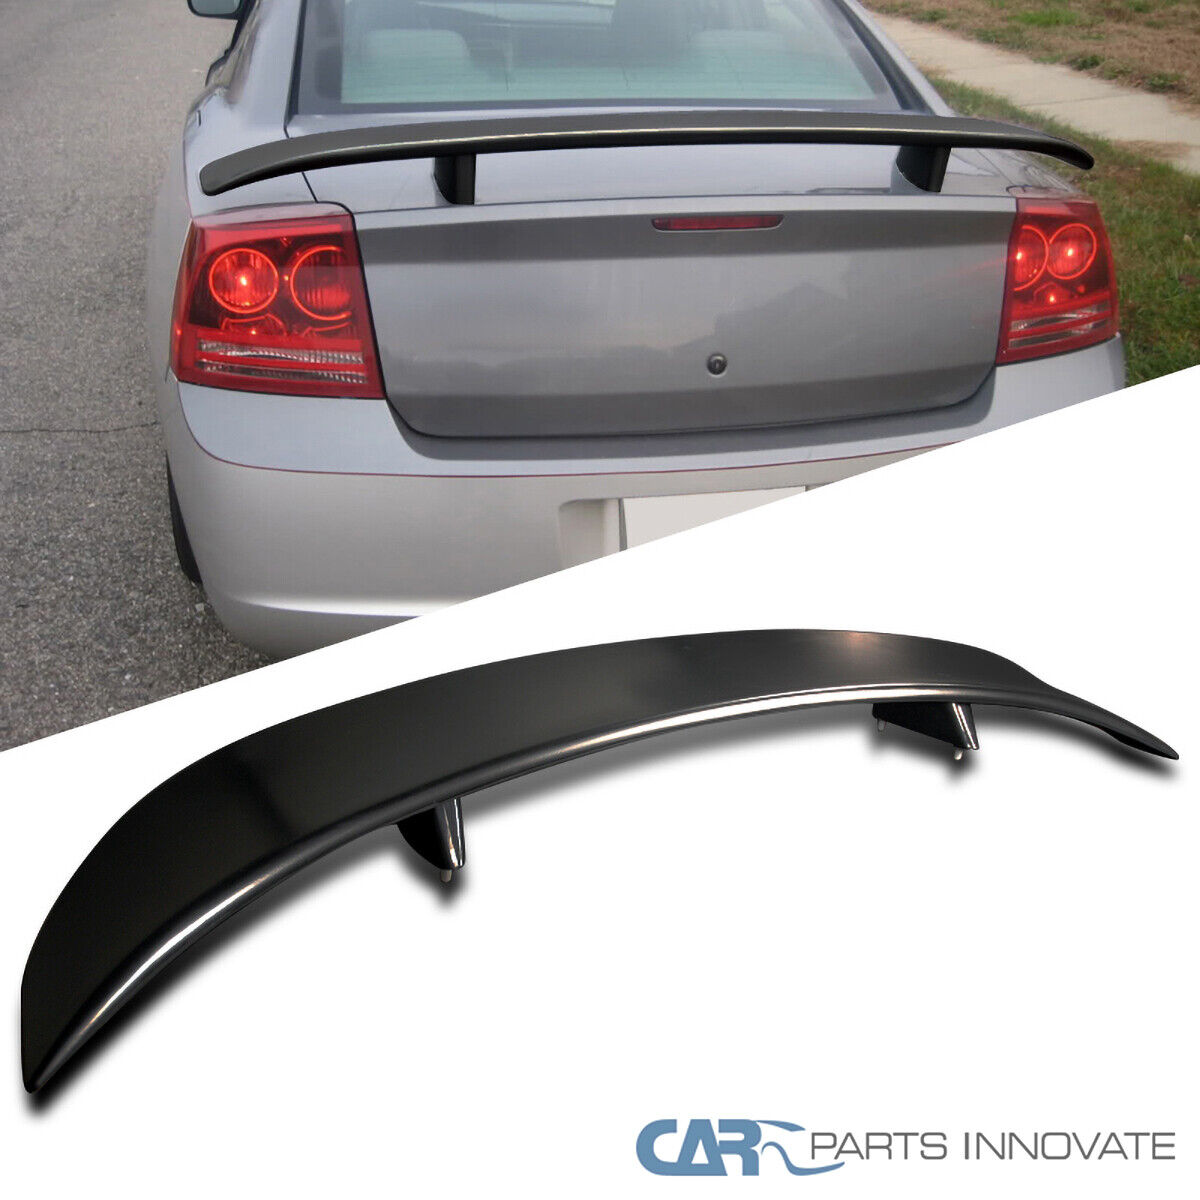 Fit 06-10 Dodge Charger Black ABS Daytona Style Rear Trunk Spoiler Wing Body Kit